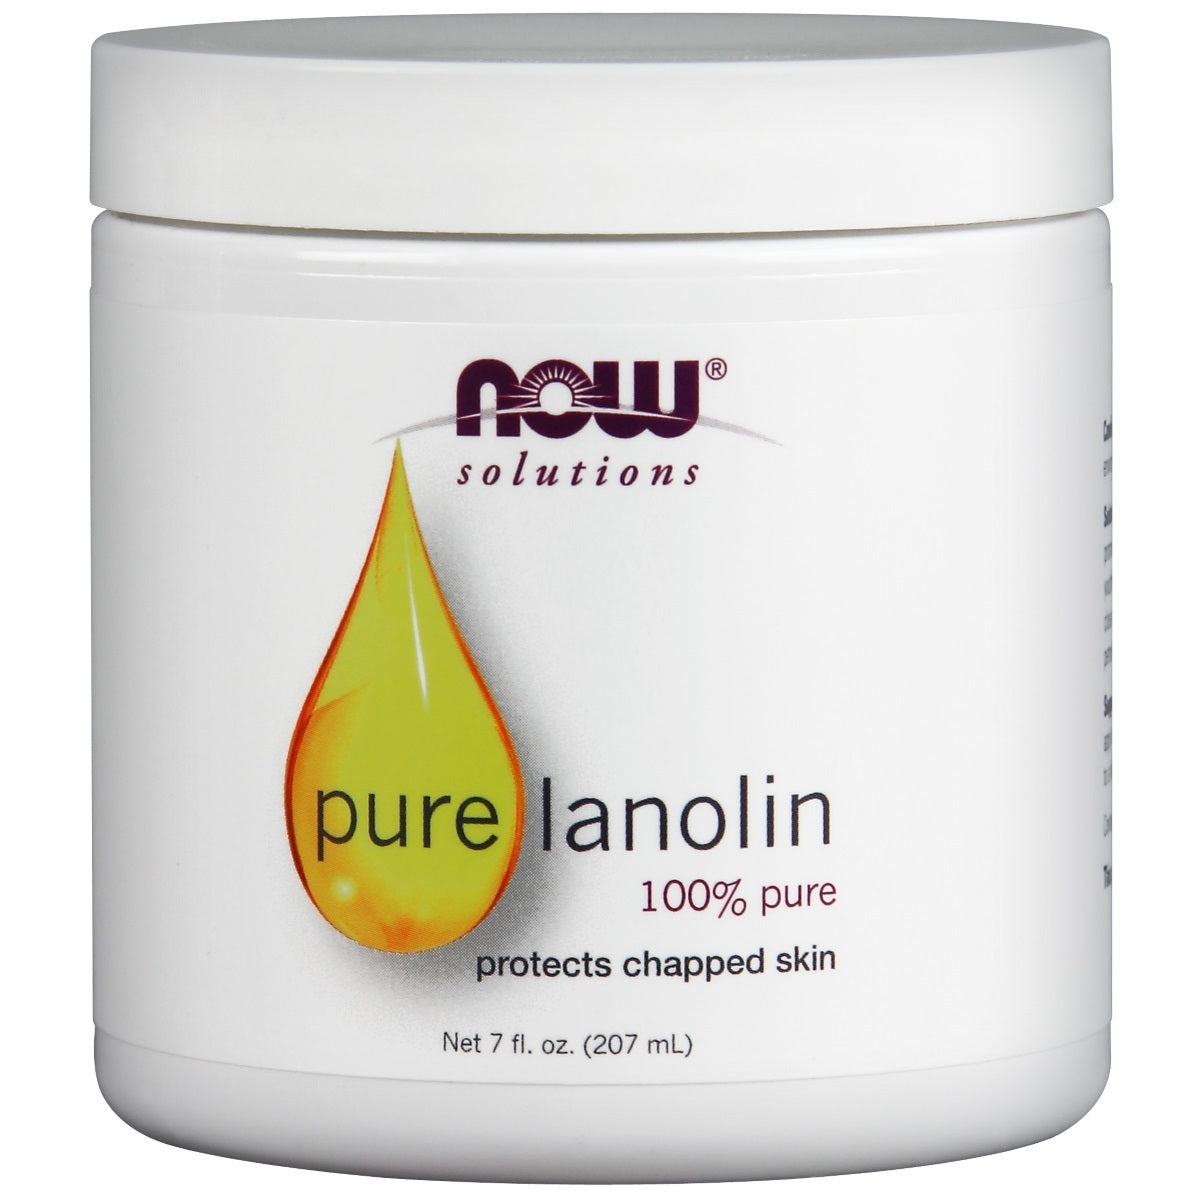 Primary image of Pure Lanolin